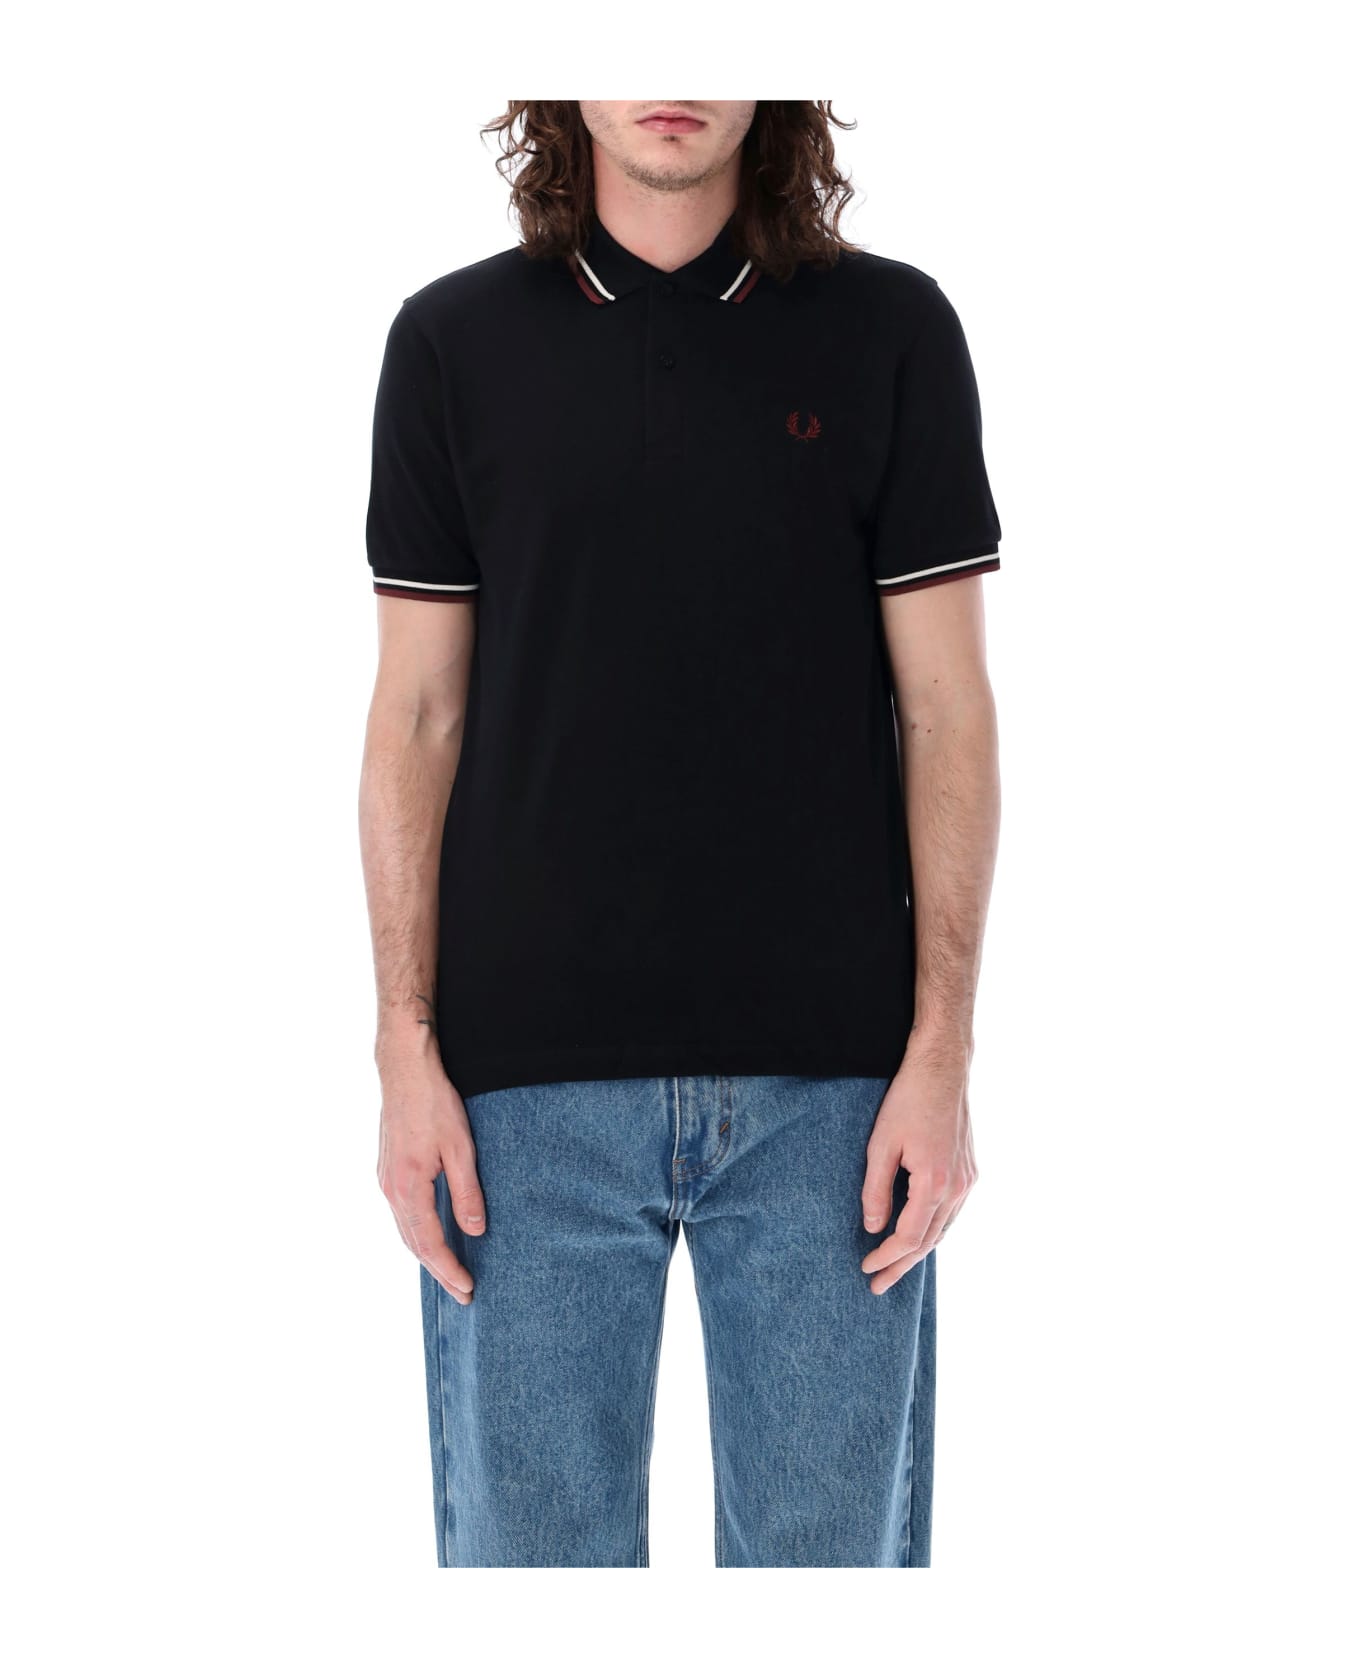 Fred Perry The Original Twin Tipped Piqué Polo Shirt - BLACK BURGUNDY ポロシャツ